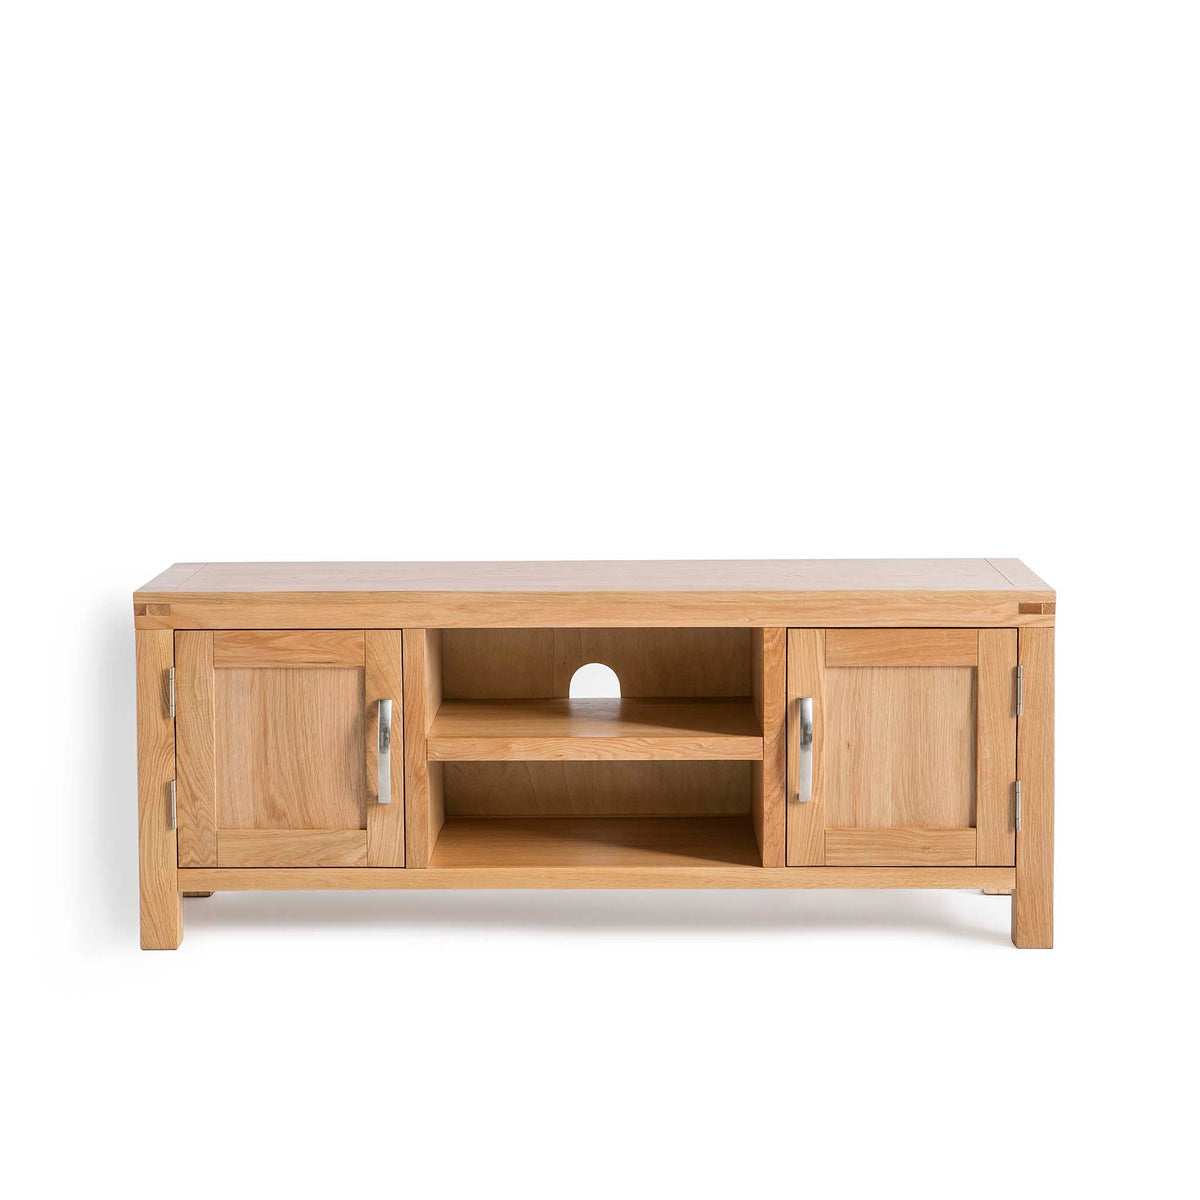 The Abbey Light Oak 120cm TV Stand by Roseland Furniture